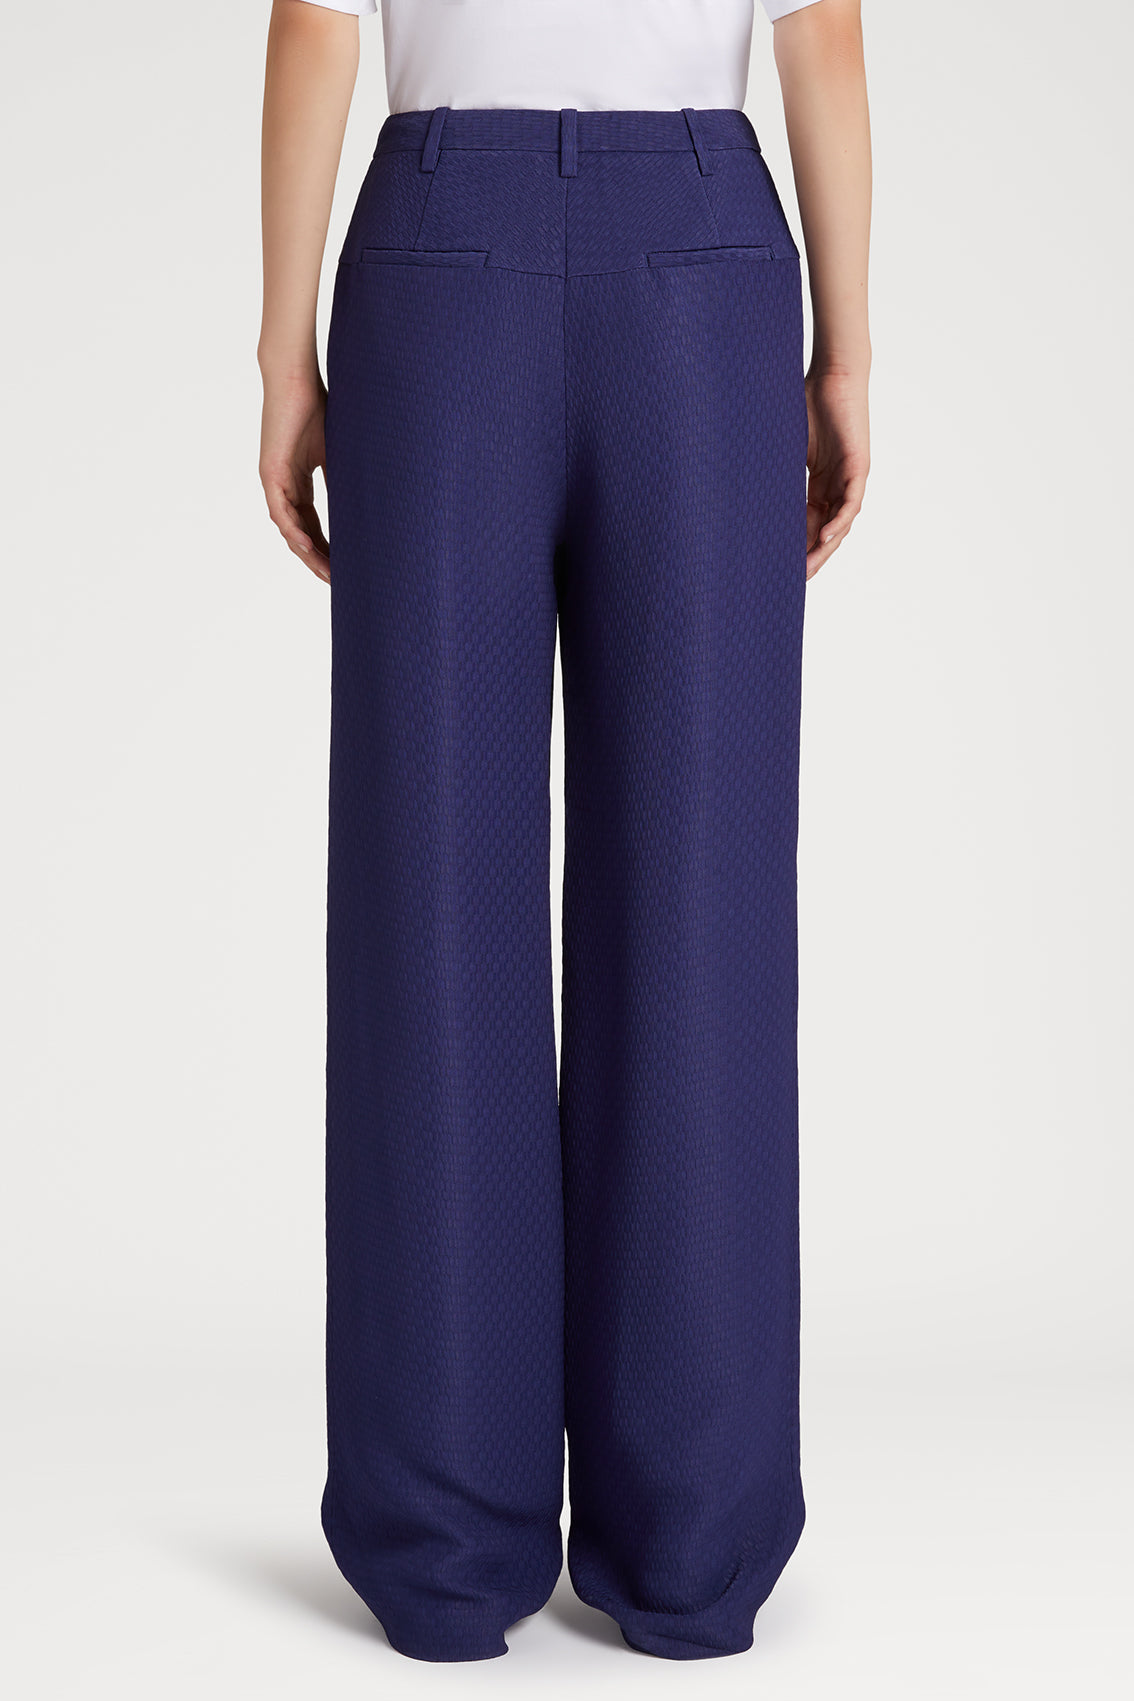 Navy and Black Geometric Jacquard Wide Fluid Trousers